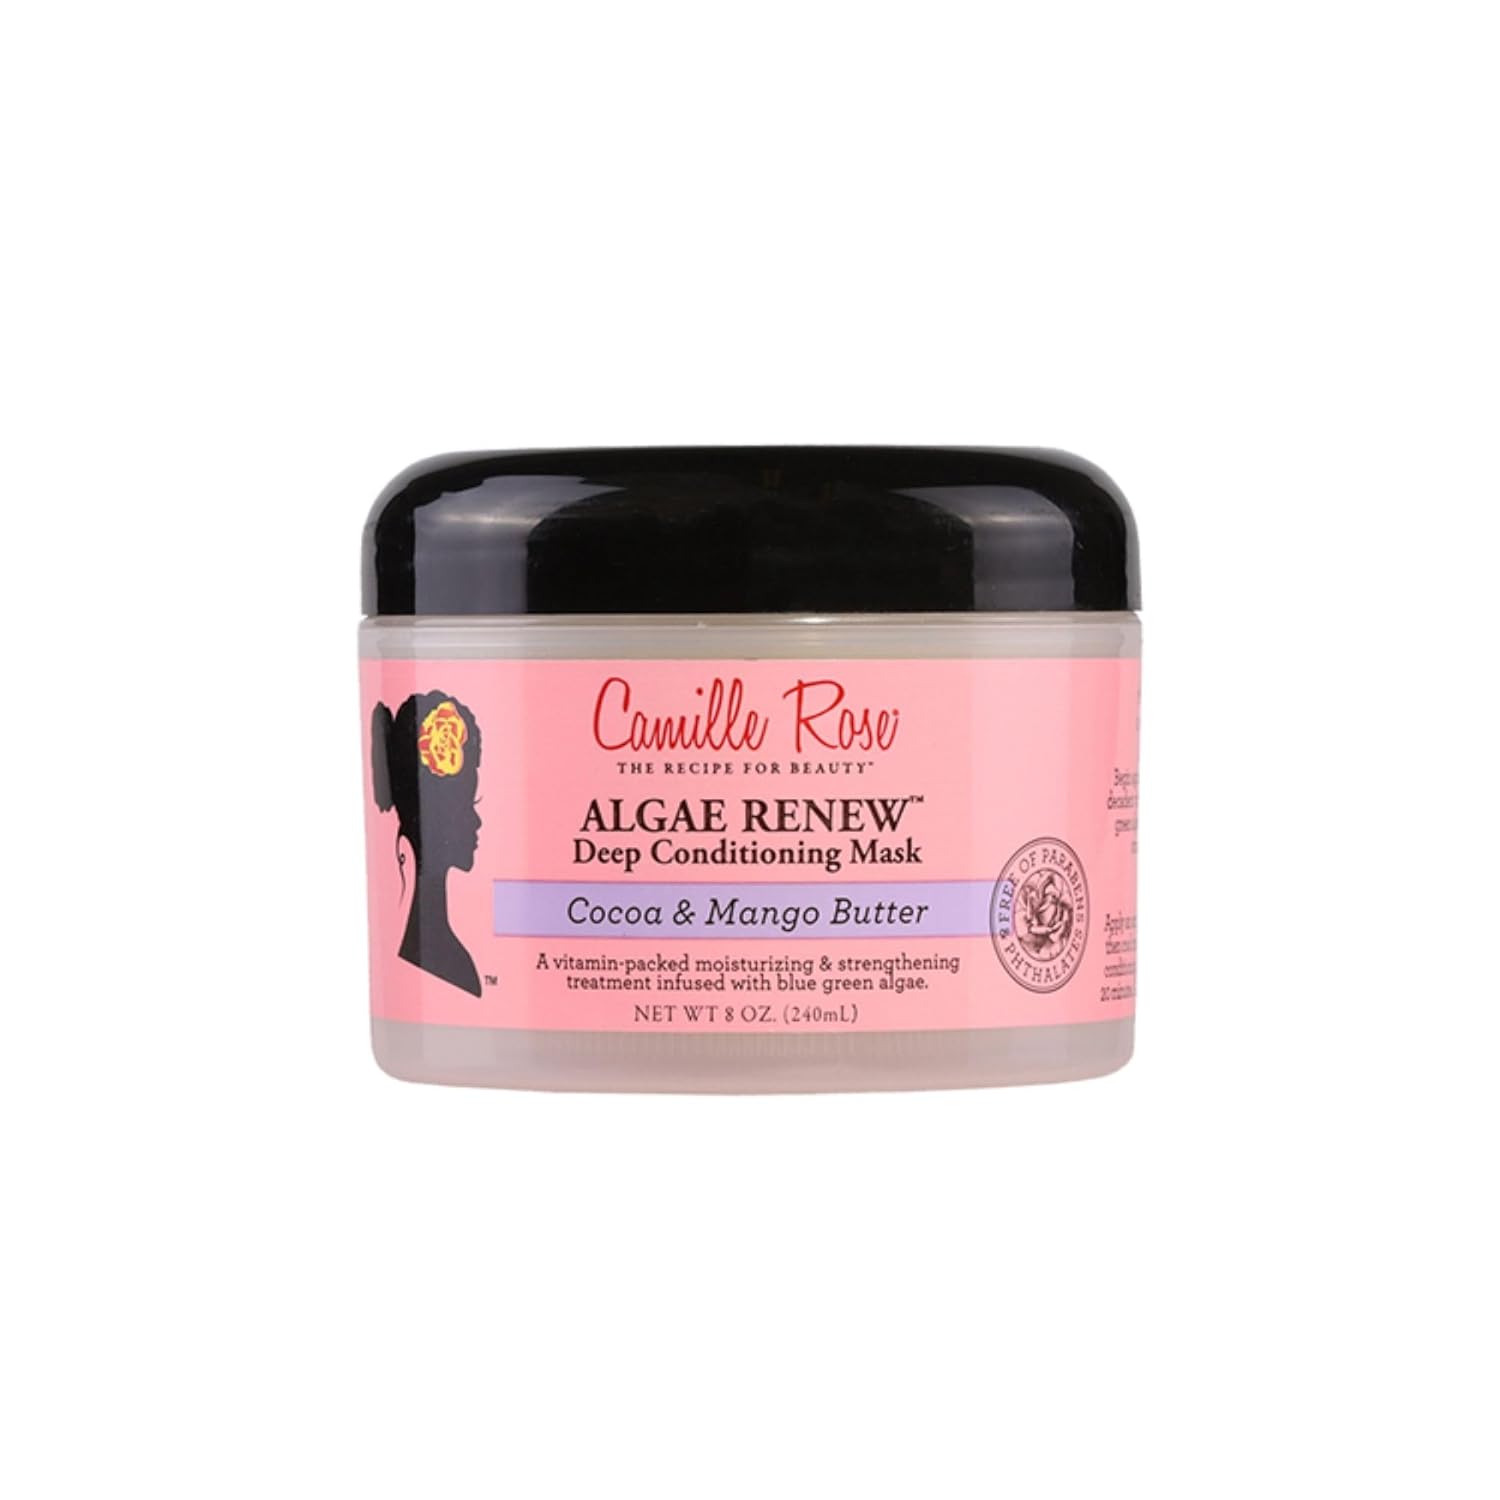 Camille Rose Algae Renew Deep Conditioning Hair Mask with Peppermint